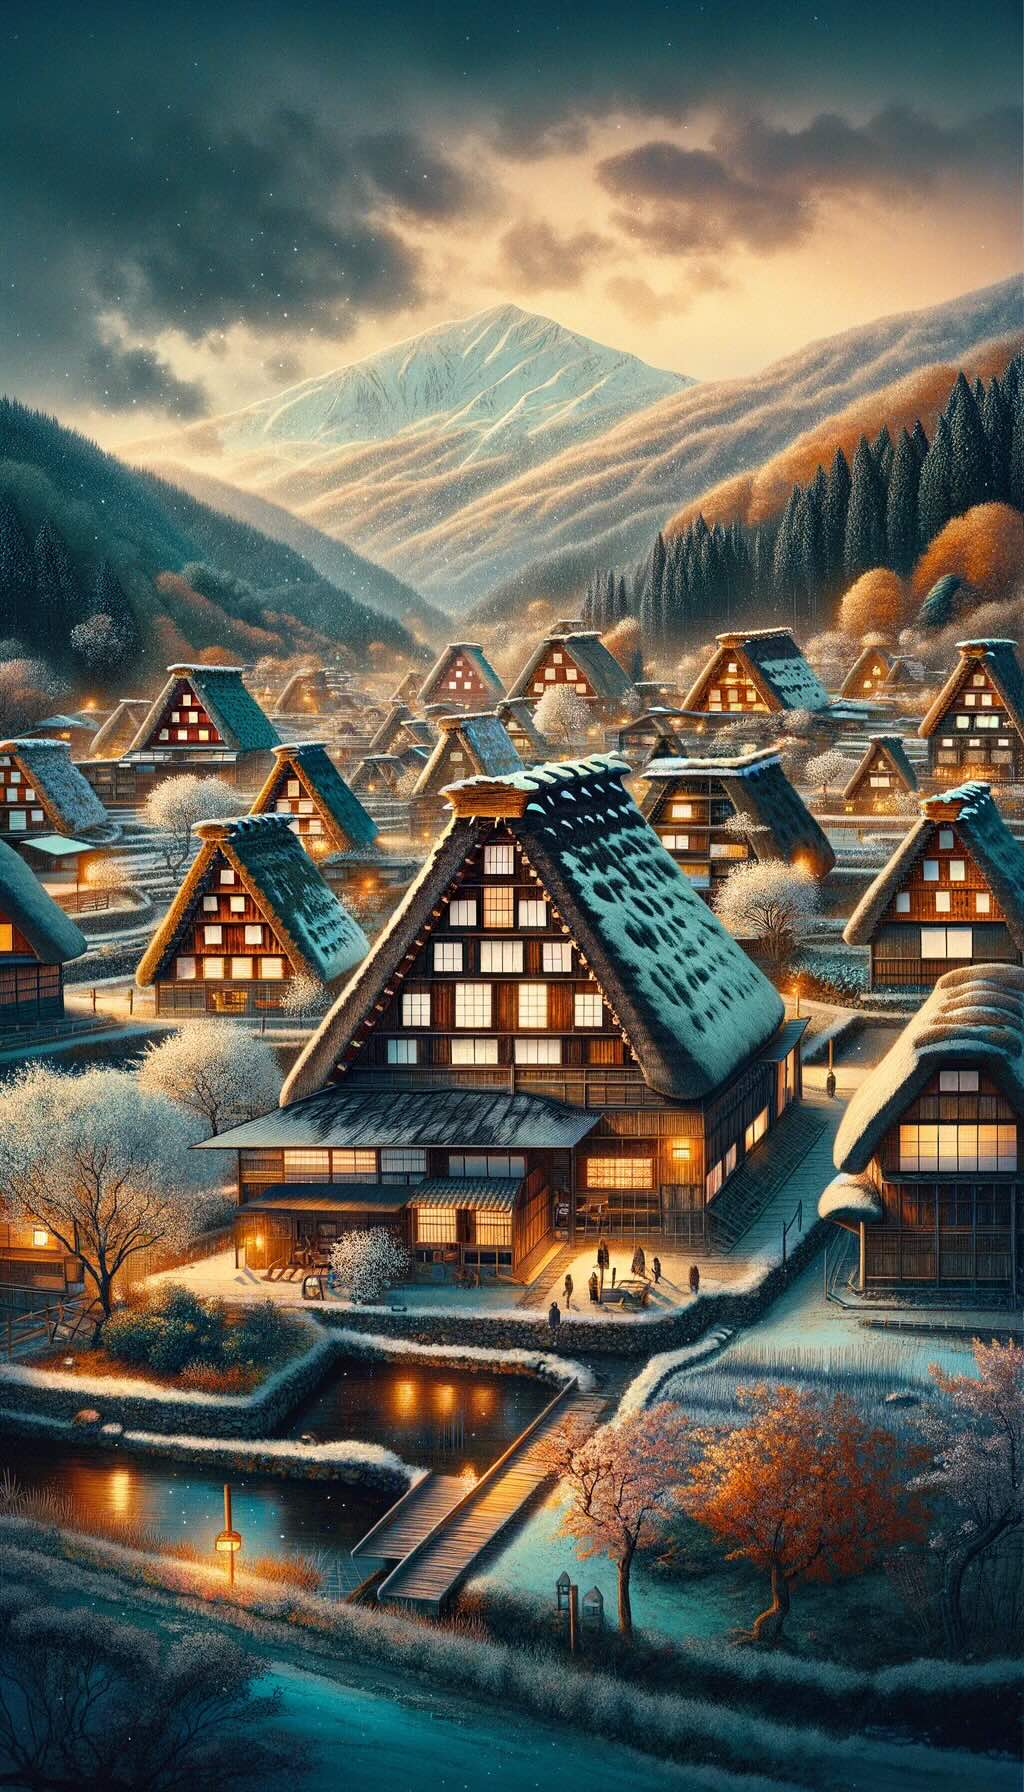 Capturing the timeless essence of Shirakawa-go depicts the village's famous gassho-zukuri houses against the backdrop of changing seasons, inviting viewers to appreciate its historical and cultural significance